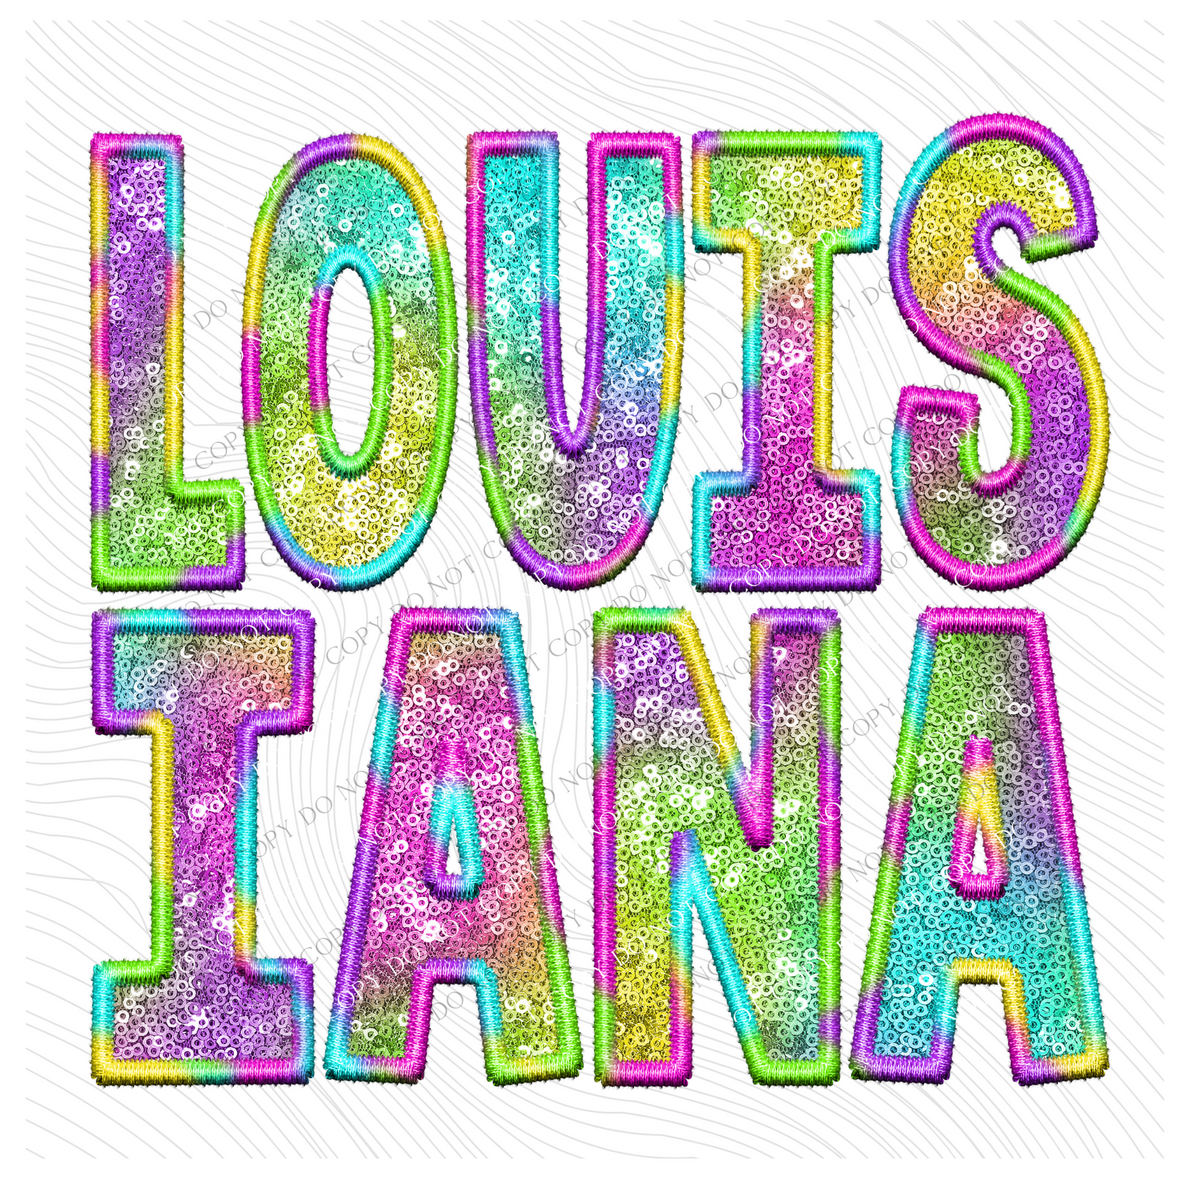 Louisiana Faux Embroidery & Sequin in Colorful Fun Tie Dye Digital Download, PNG